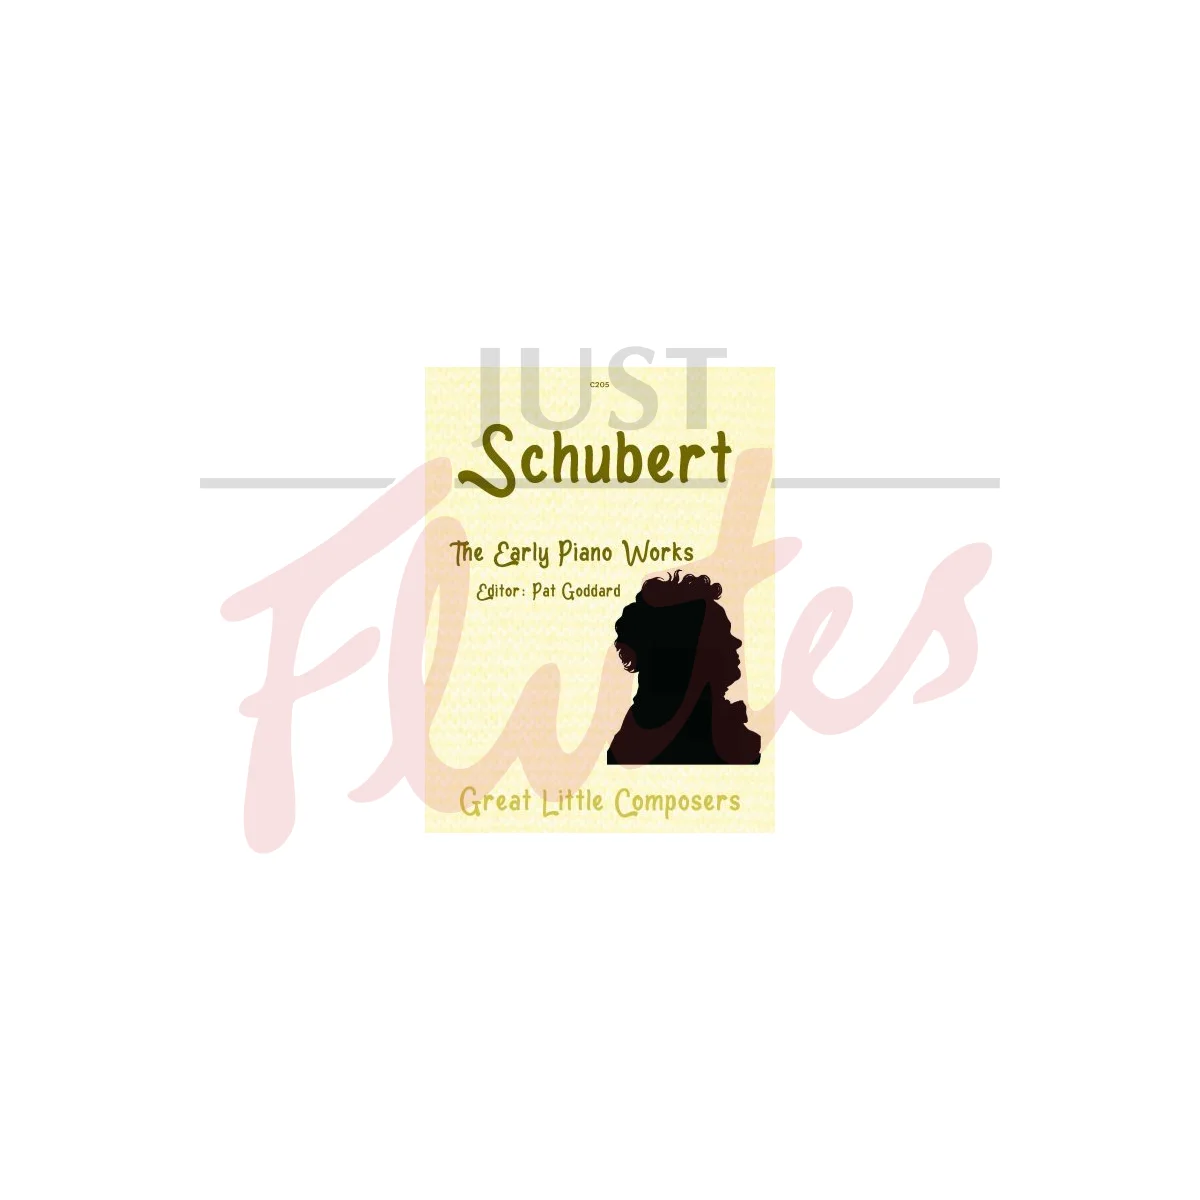 Schubert: The Early Piano Works